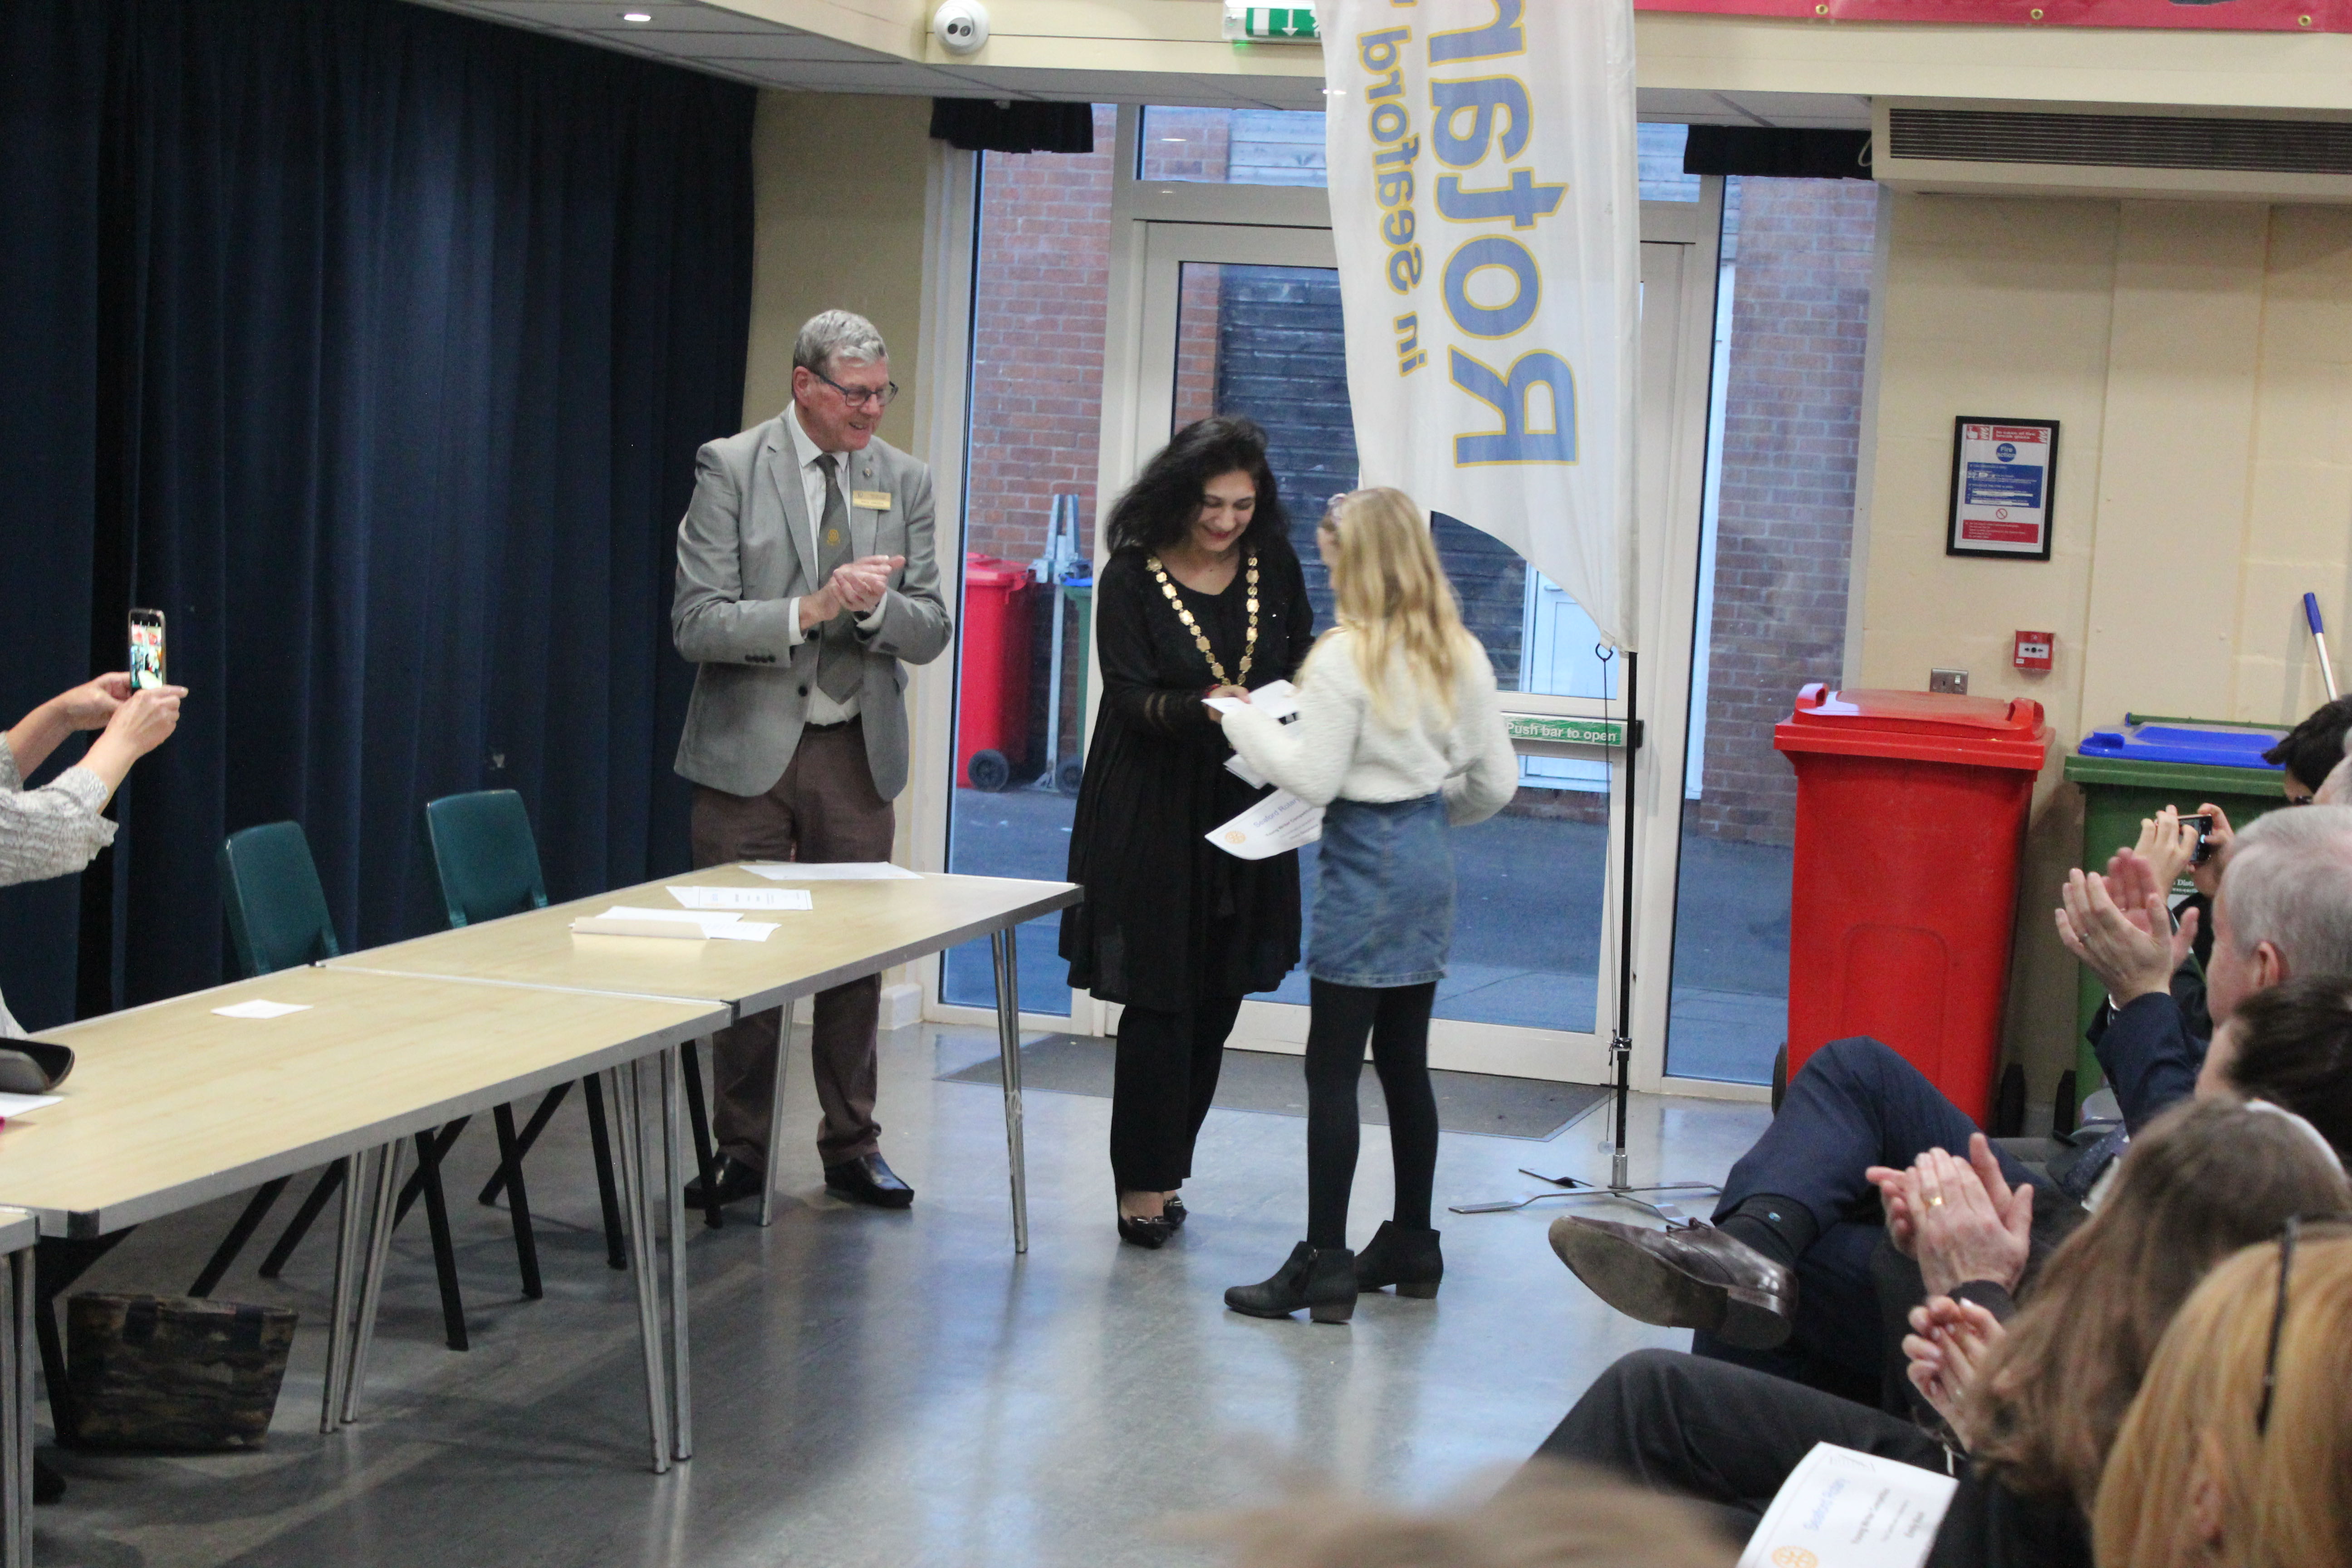 Young Writers Competition 2019 2020 - Mayor of Seaford Nazish Adil presents award to competitor with Rotarian Paul Vaesen
